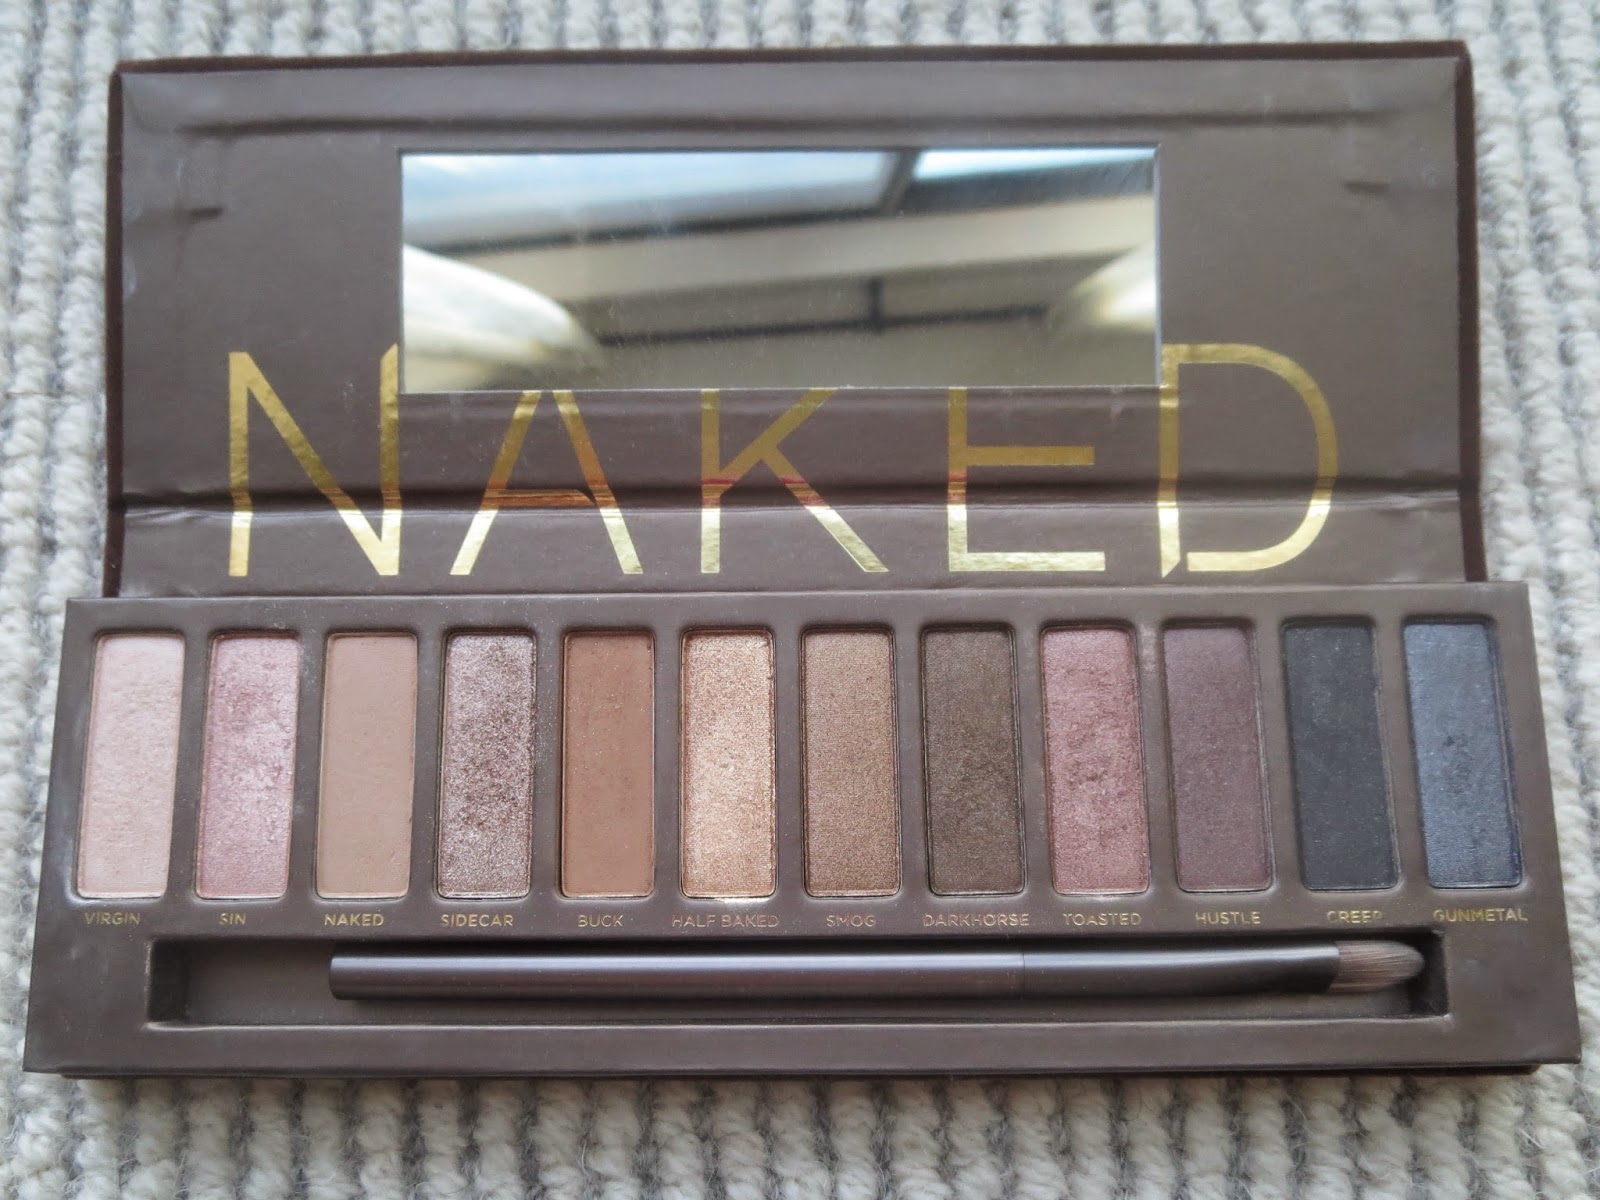 a picture of Urban Decay's Naked Palette